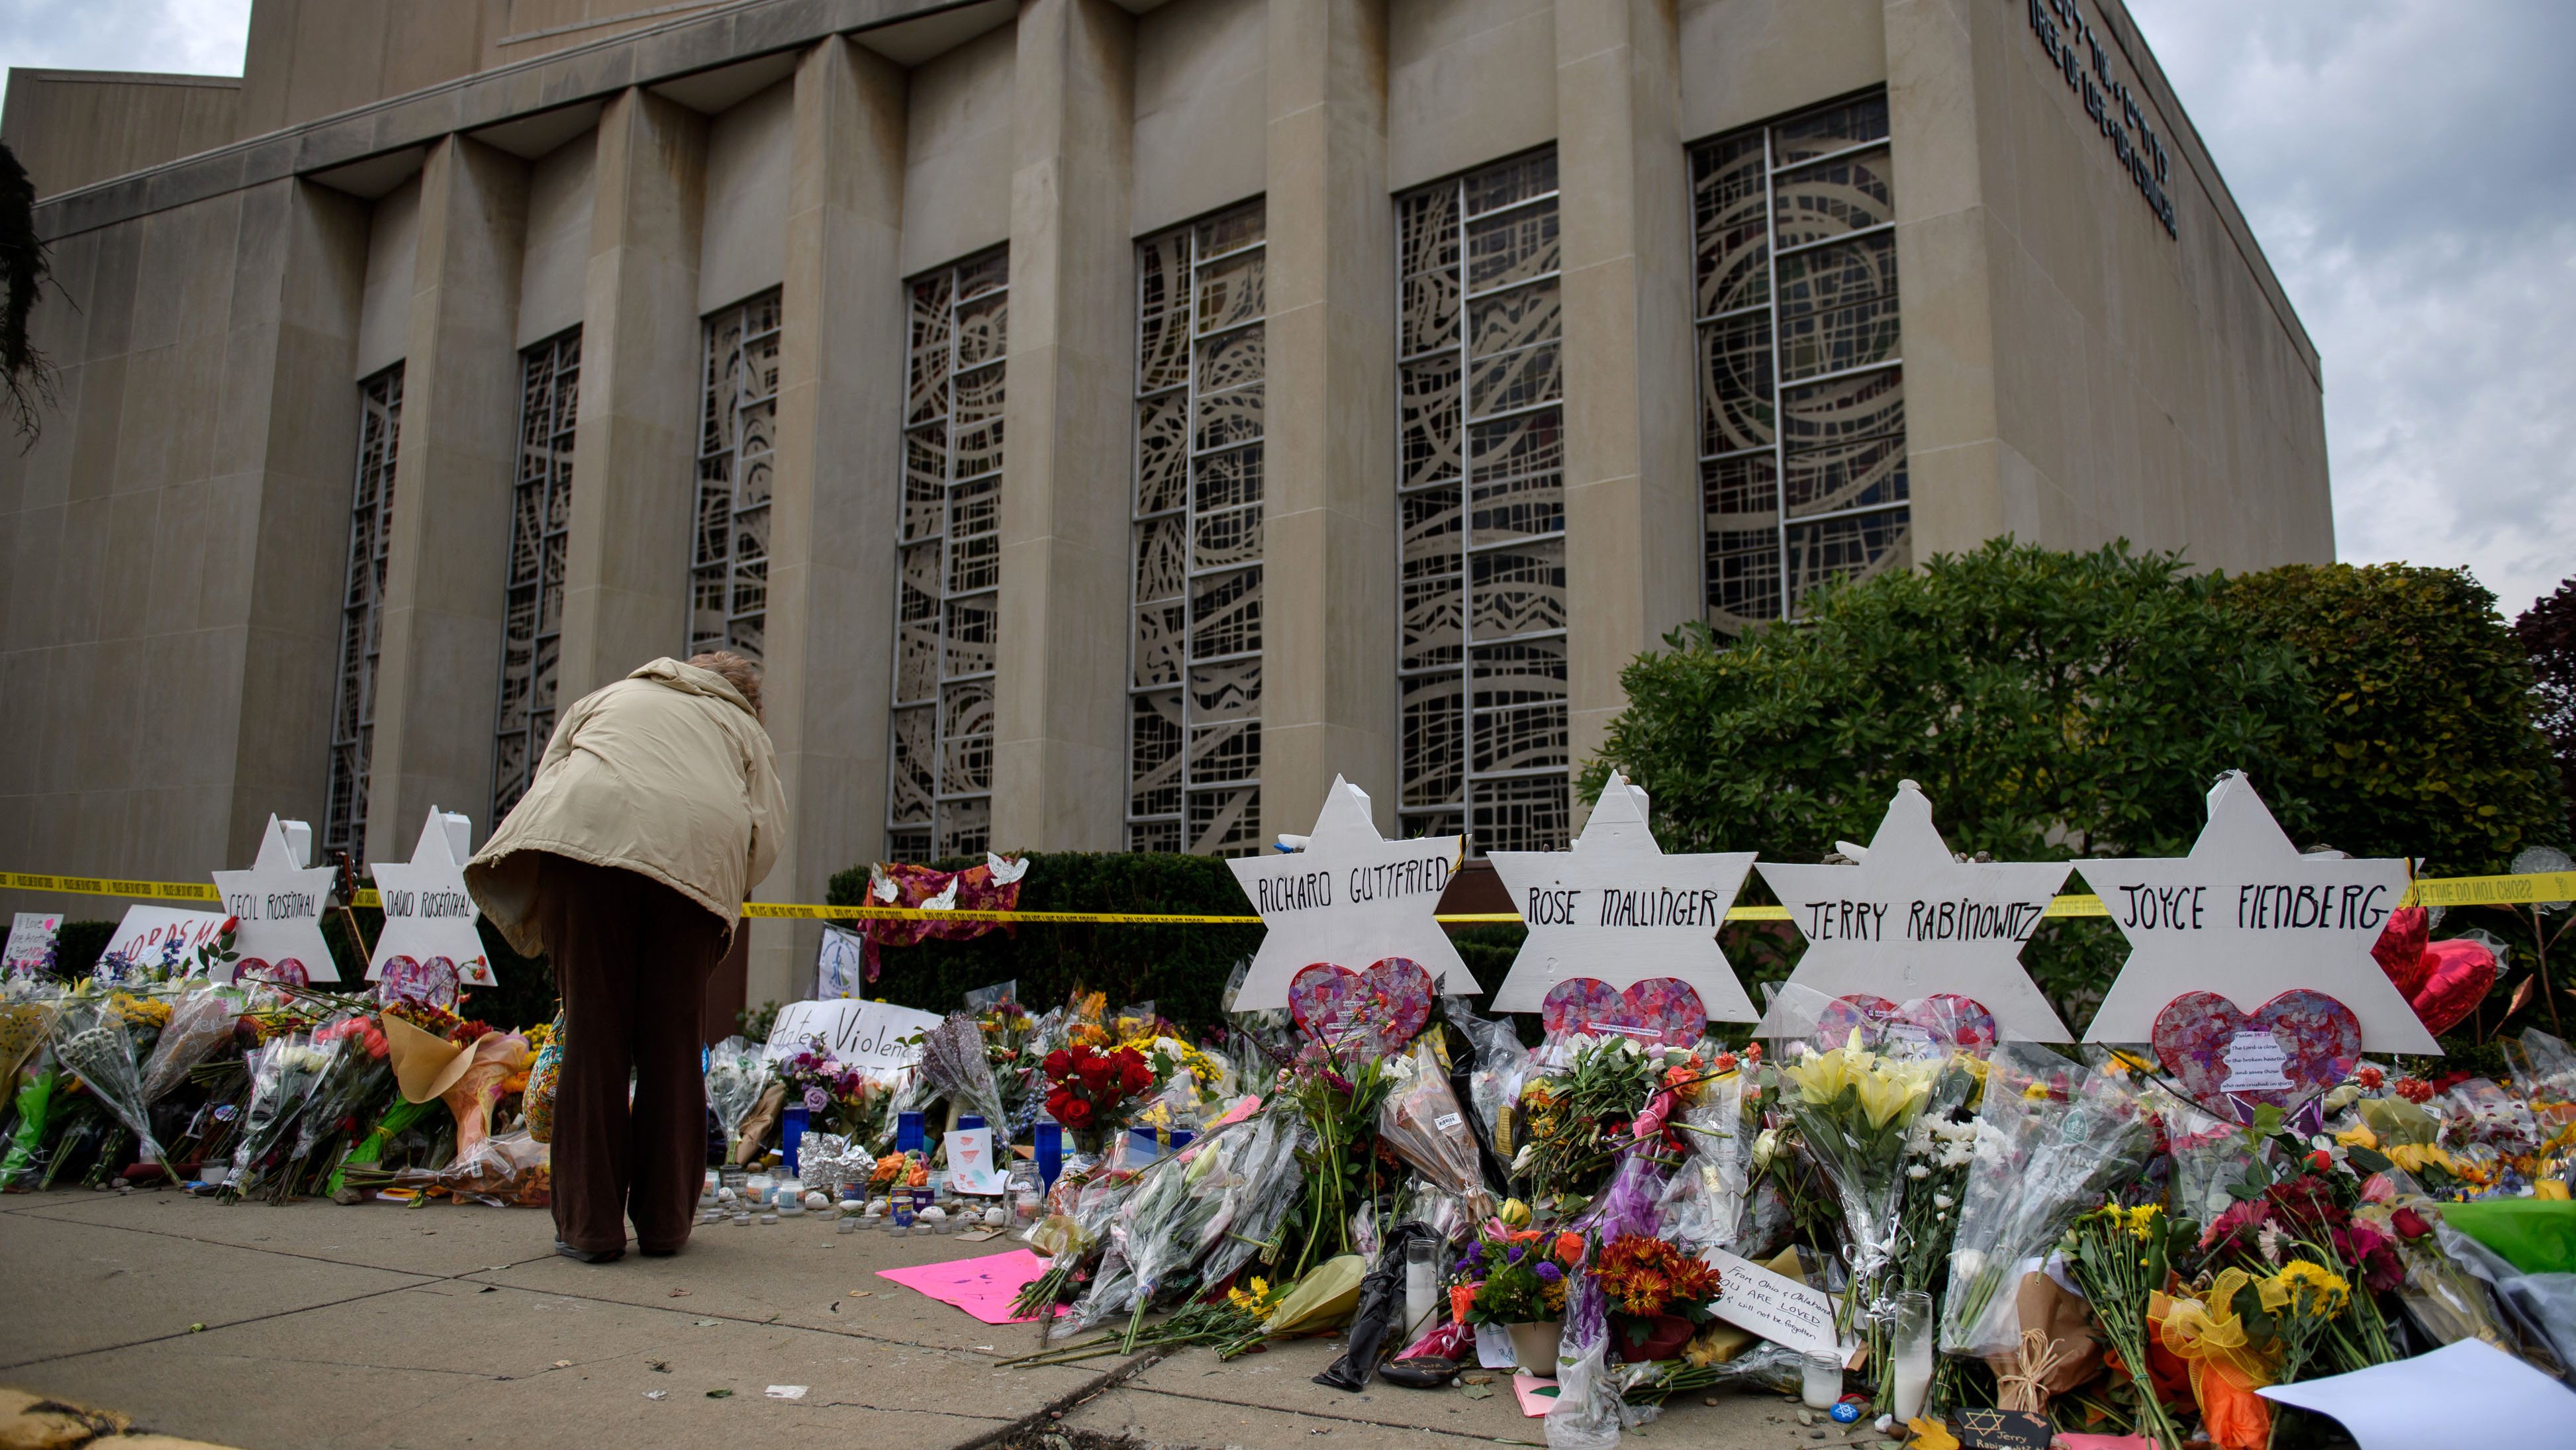 Eleven people were killed in a mass shooting at the Tree of Life Congregation in Pittsburgh.